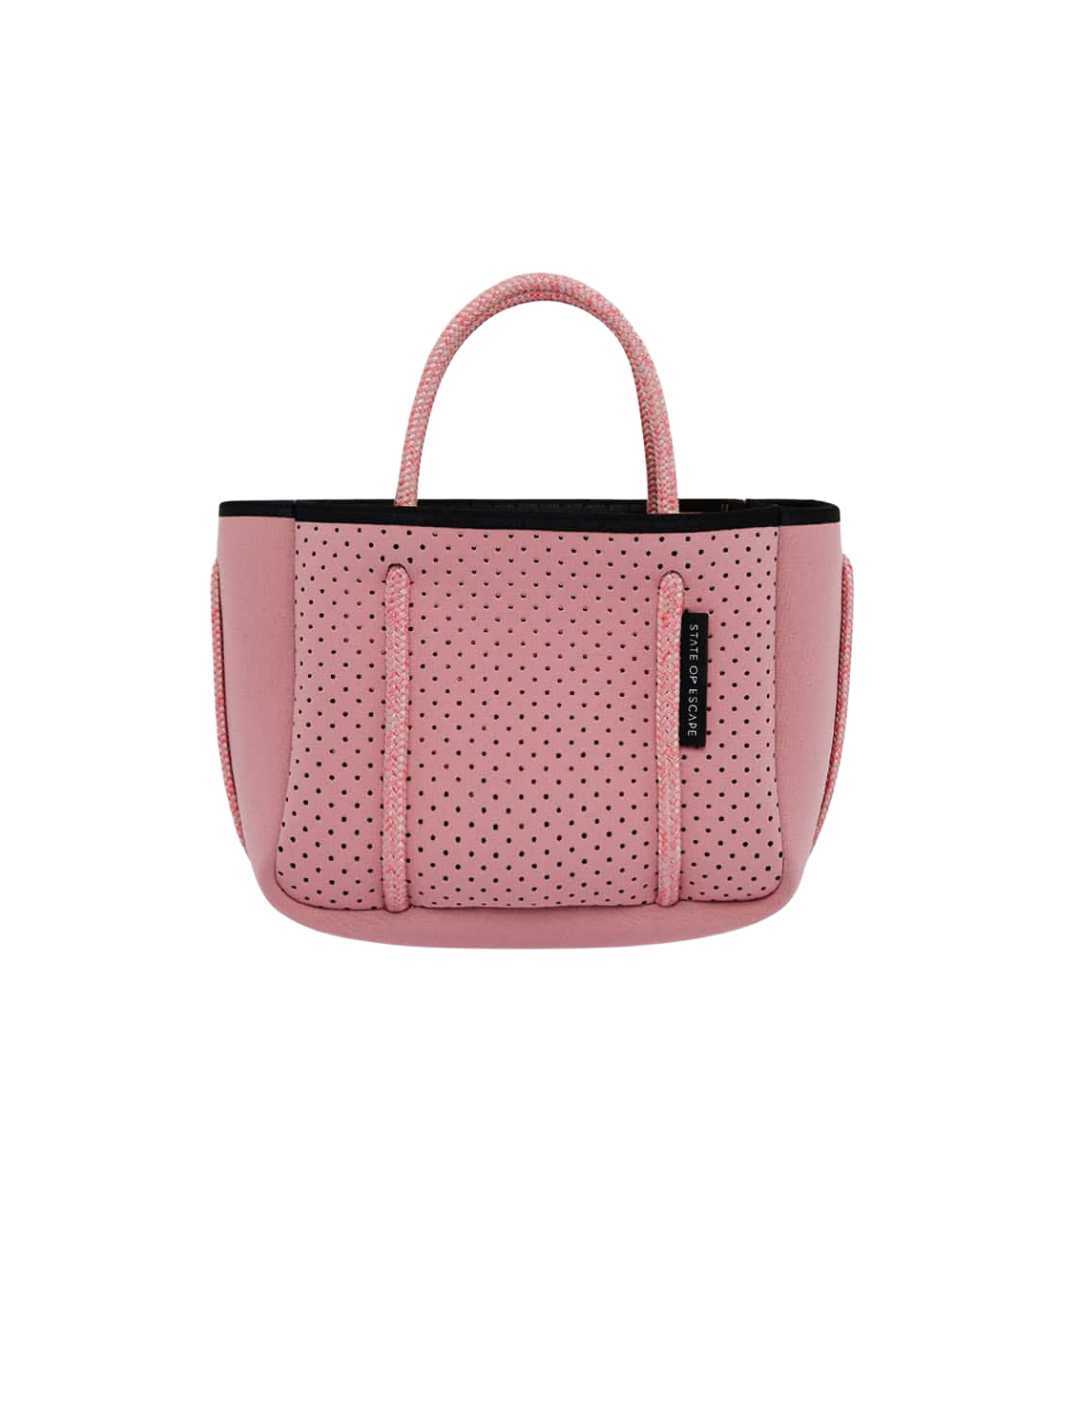 State of Escape Bags Tote Bag | Micro Dusty Pink